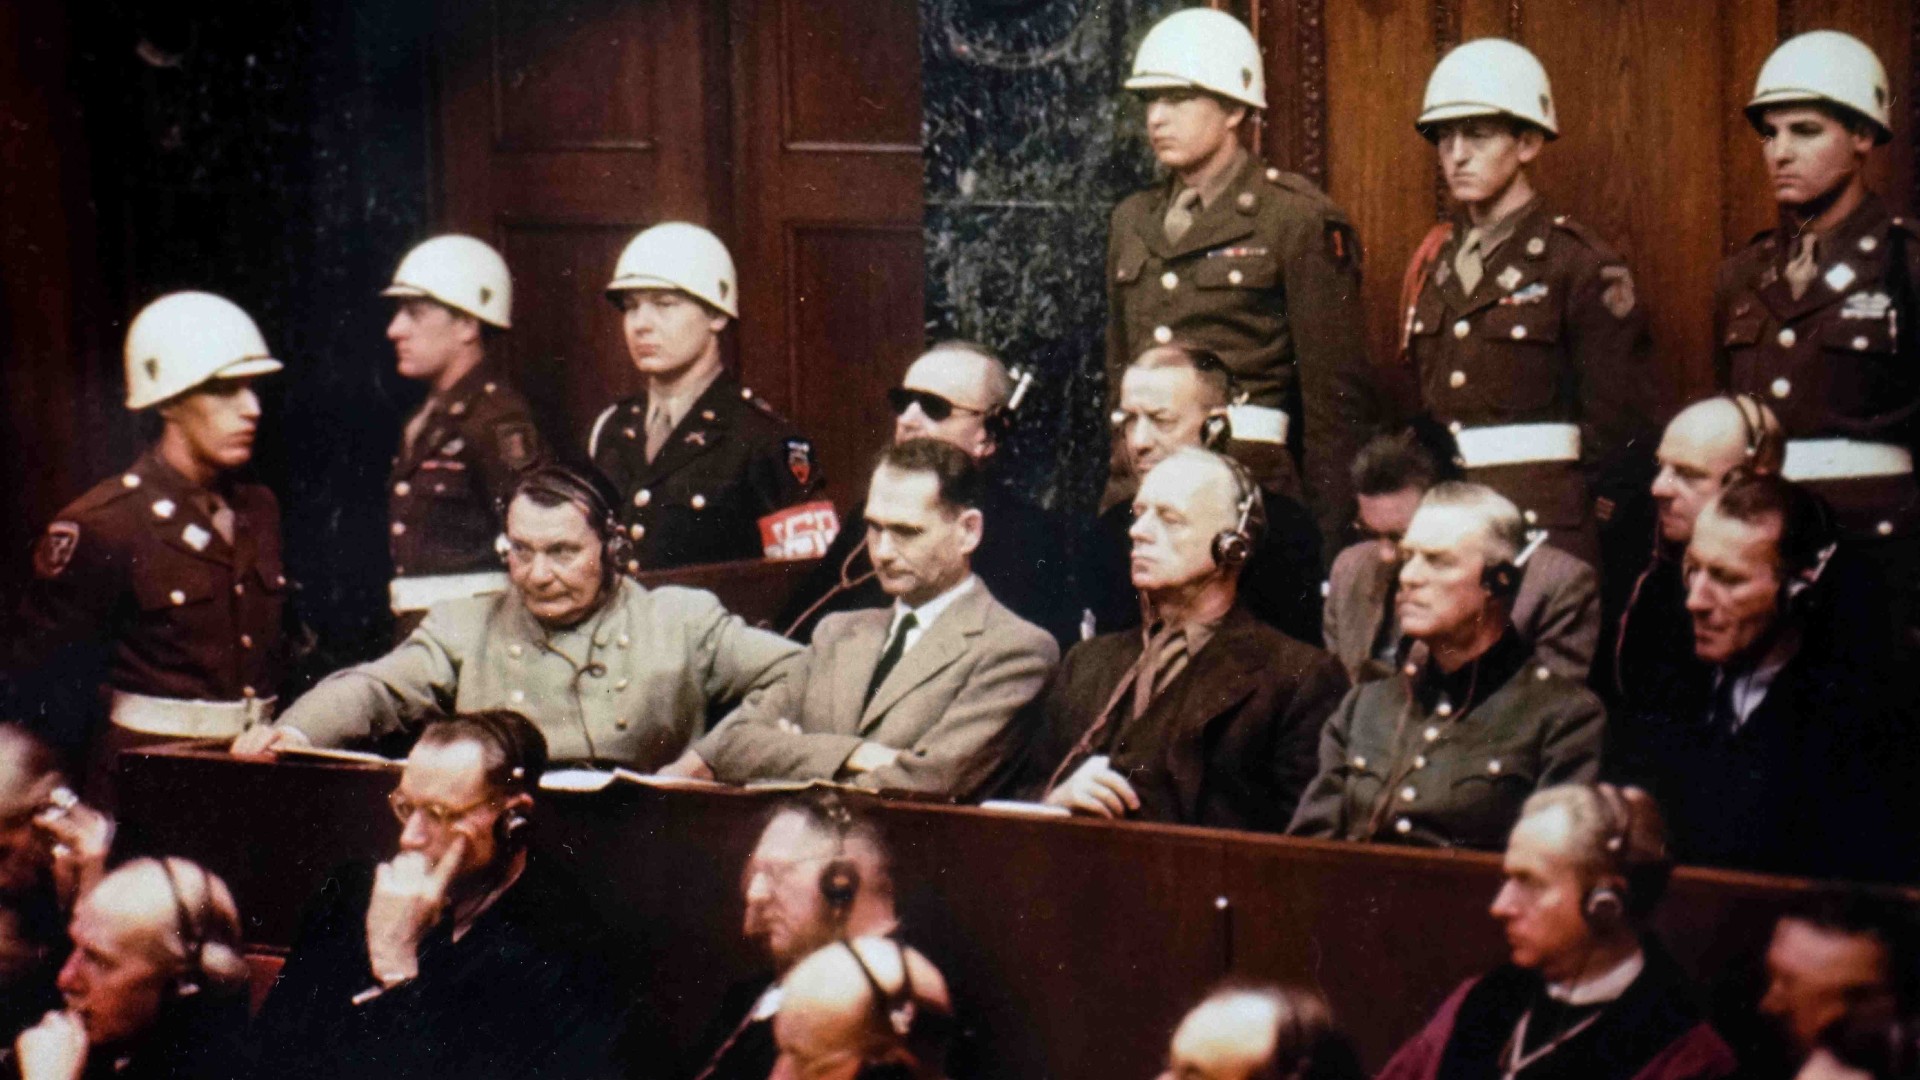 Photograph of Rudolf Hess taken during the Nuremberg Trials. He is sitting in the middle of a bench with his arms crossed, wearing a light tan suit with a black tie. He has short black hair. Behind him are six guards wearing uniform and white helmets. Either side of him and on the bench below are a number of men in suits all wearing headphones.